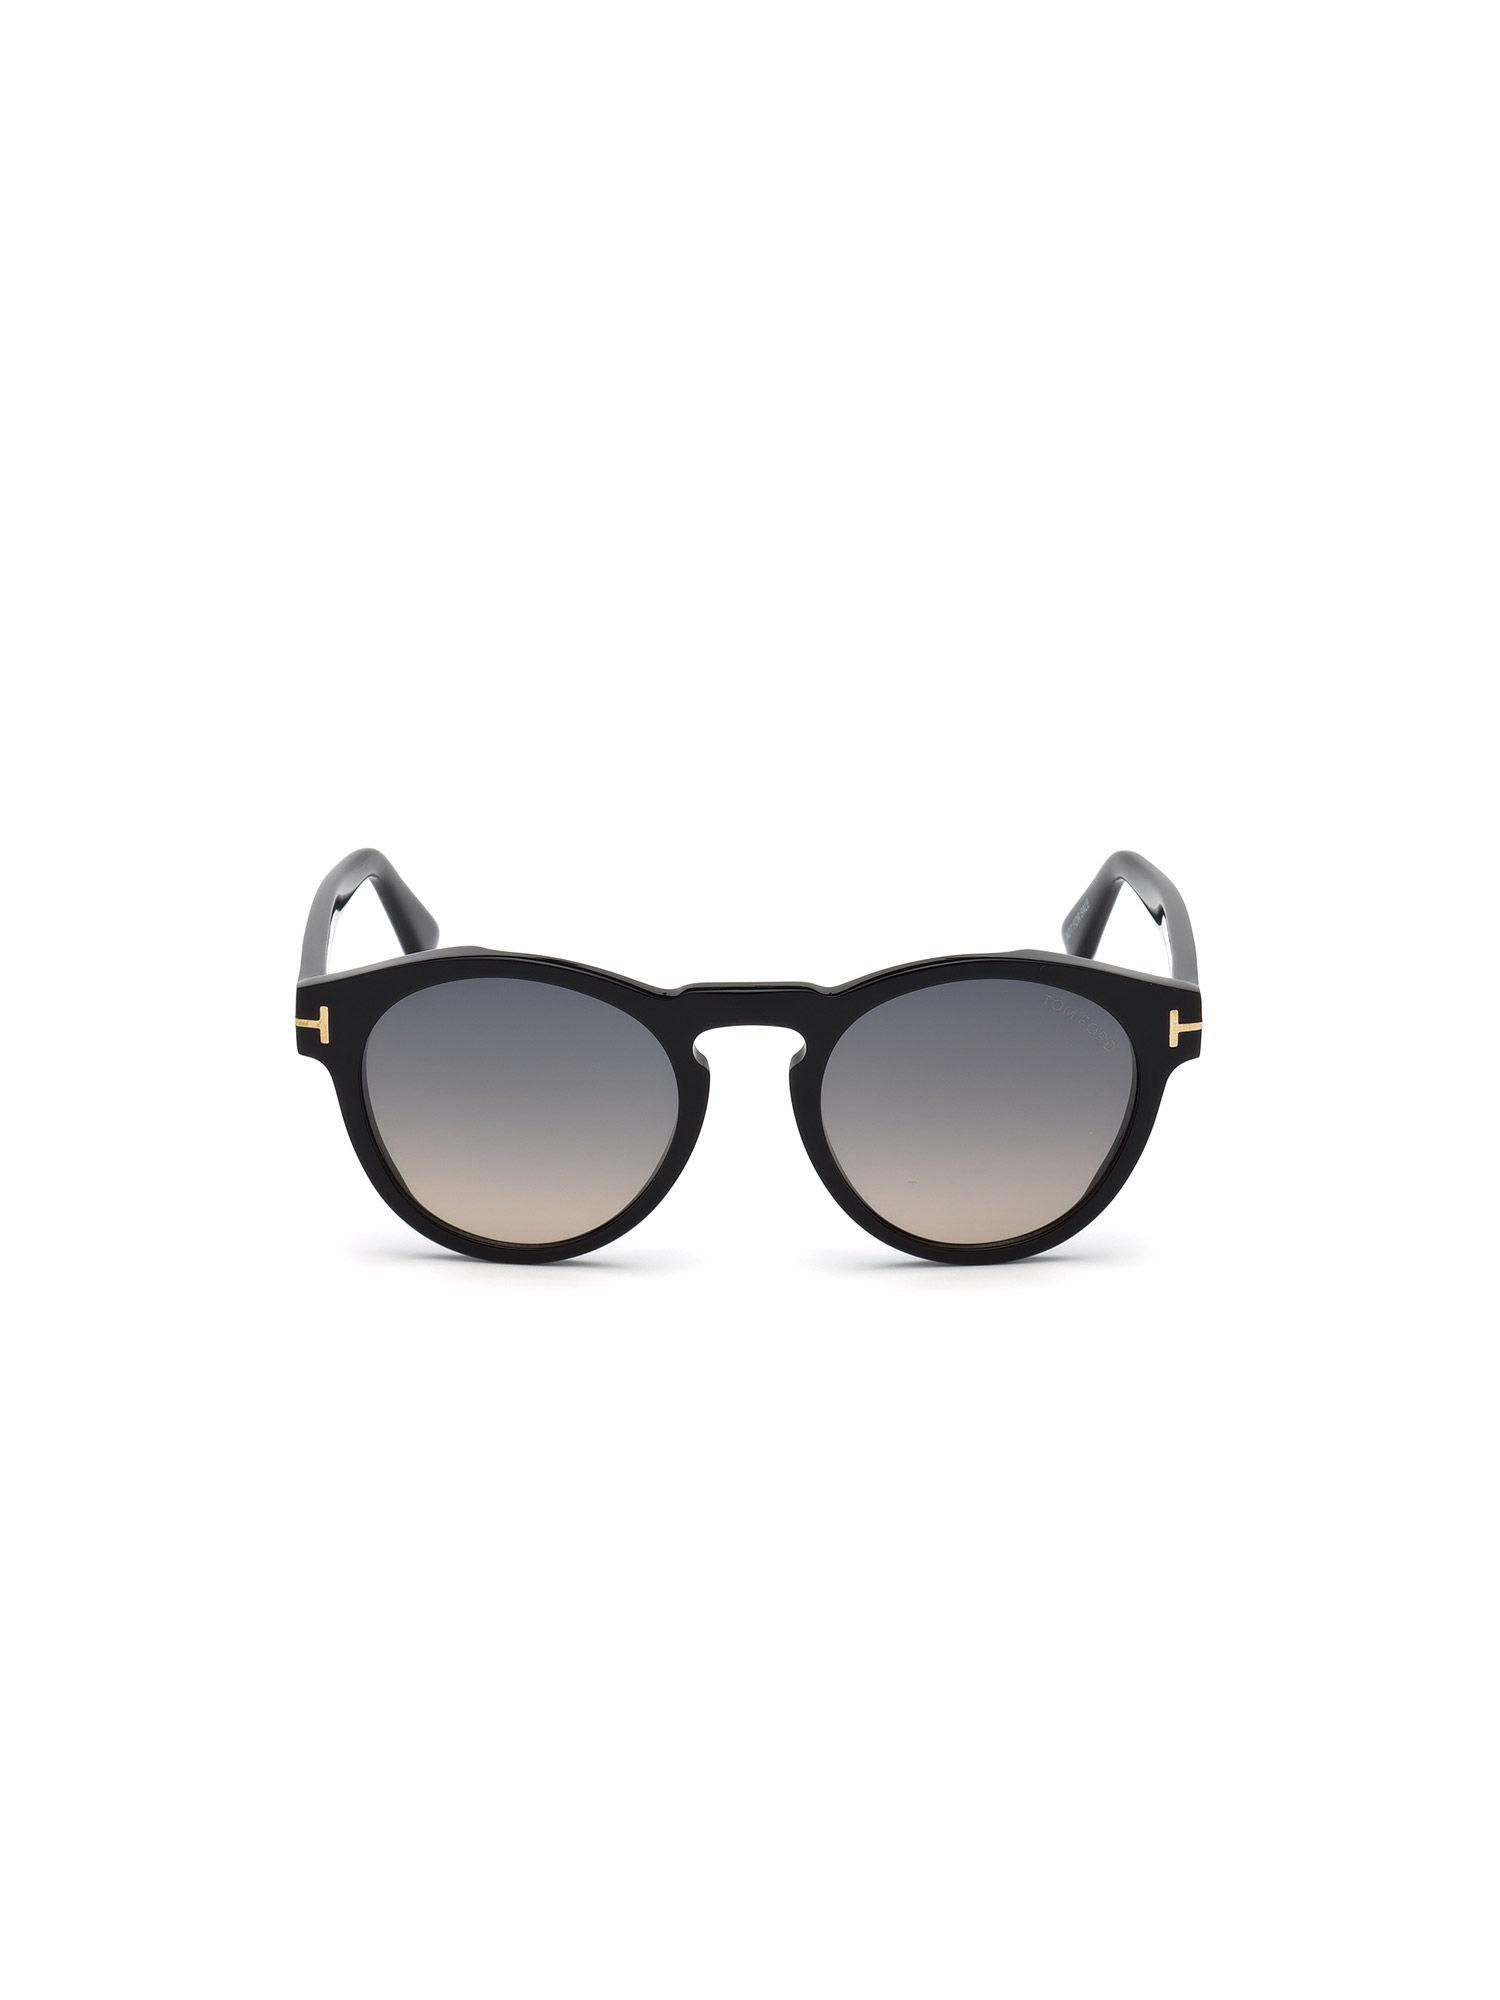 Ft0615 52 01B IS A Selection Of Iconic Round Shapes IN Premium Sunglasses